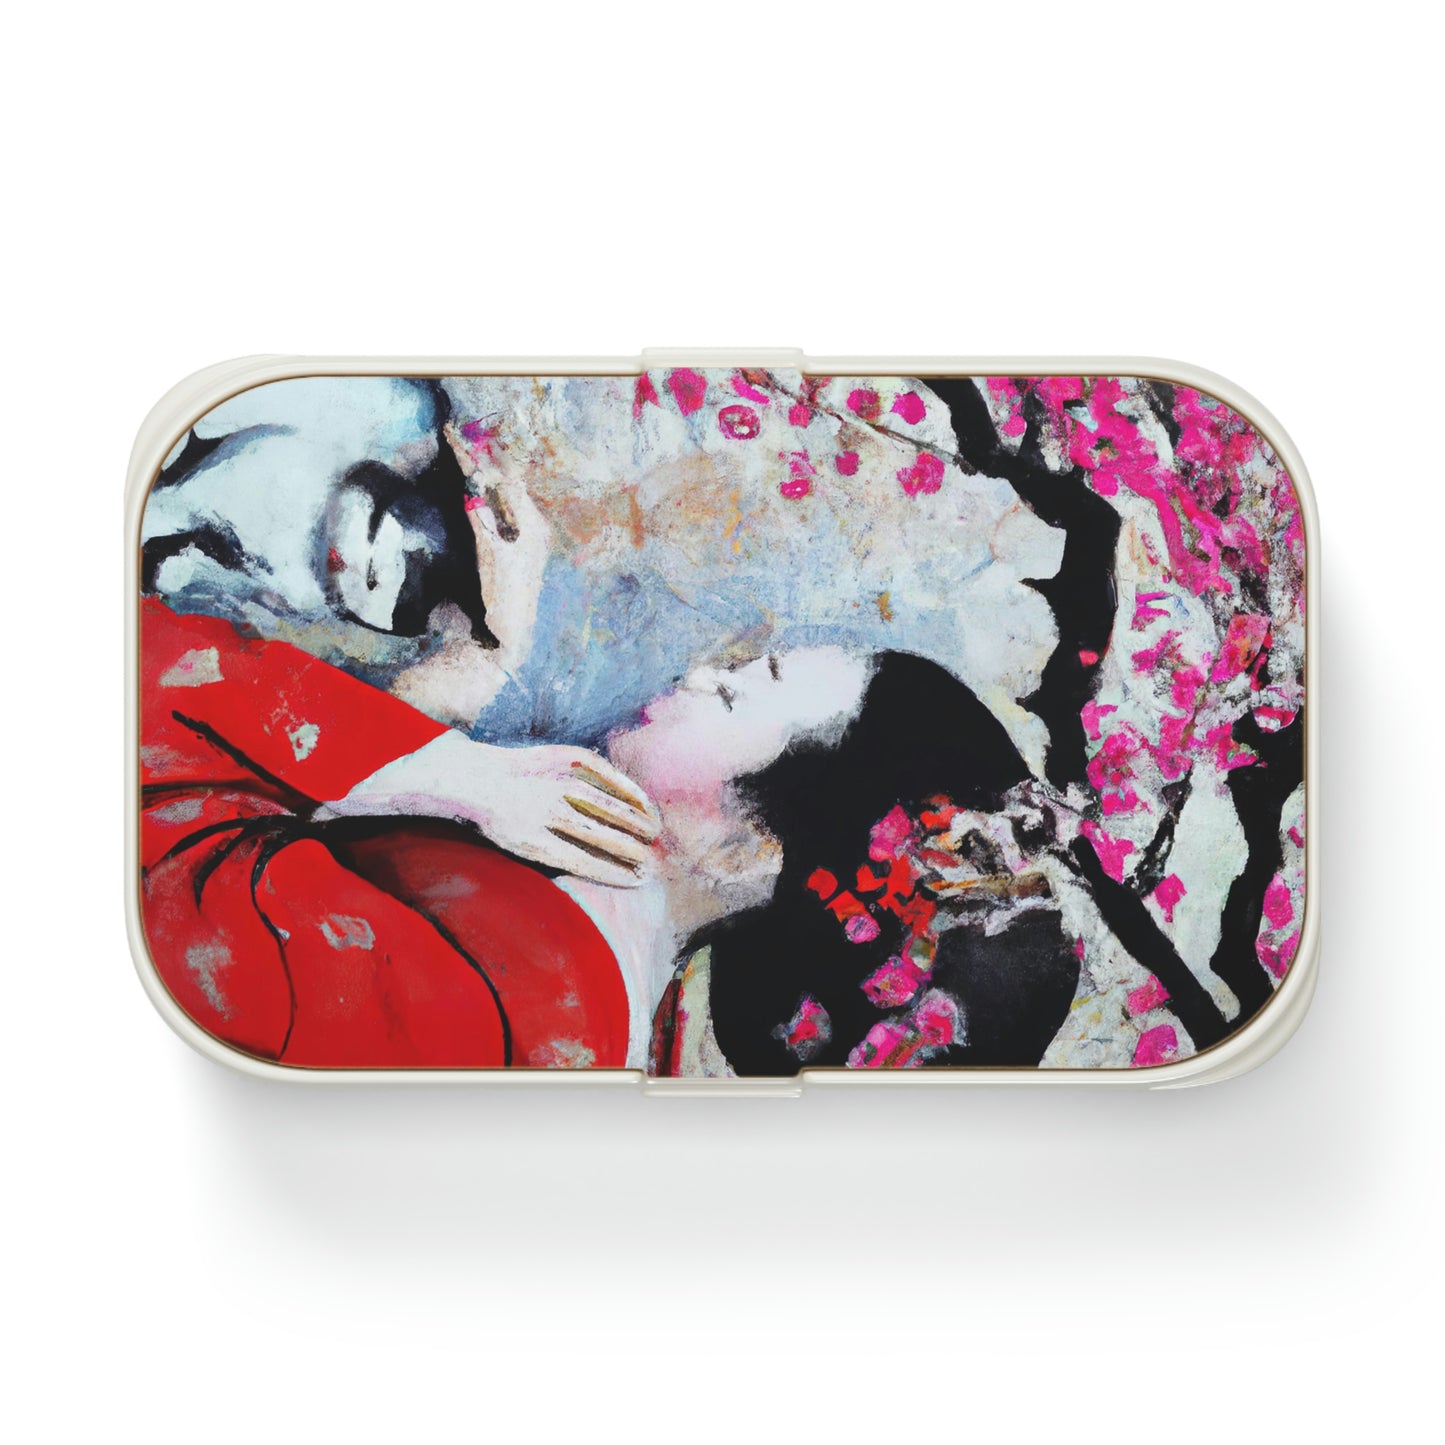 Geisha and a cat Bento Lunch Box, art painting maiko and a cat and a sakura bento, cat feudal japan lunch box, back to school cat lover gift